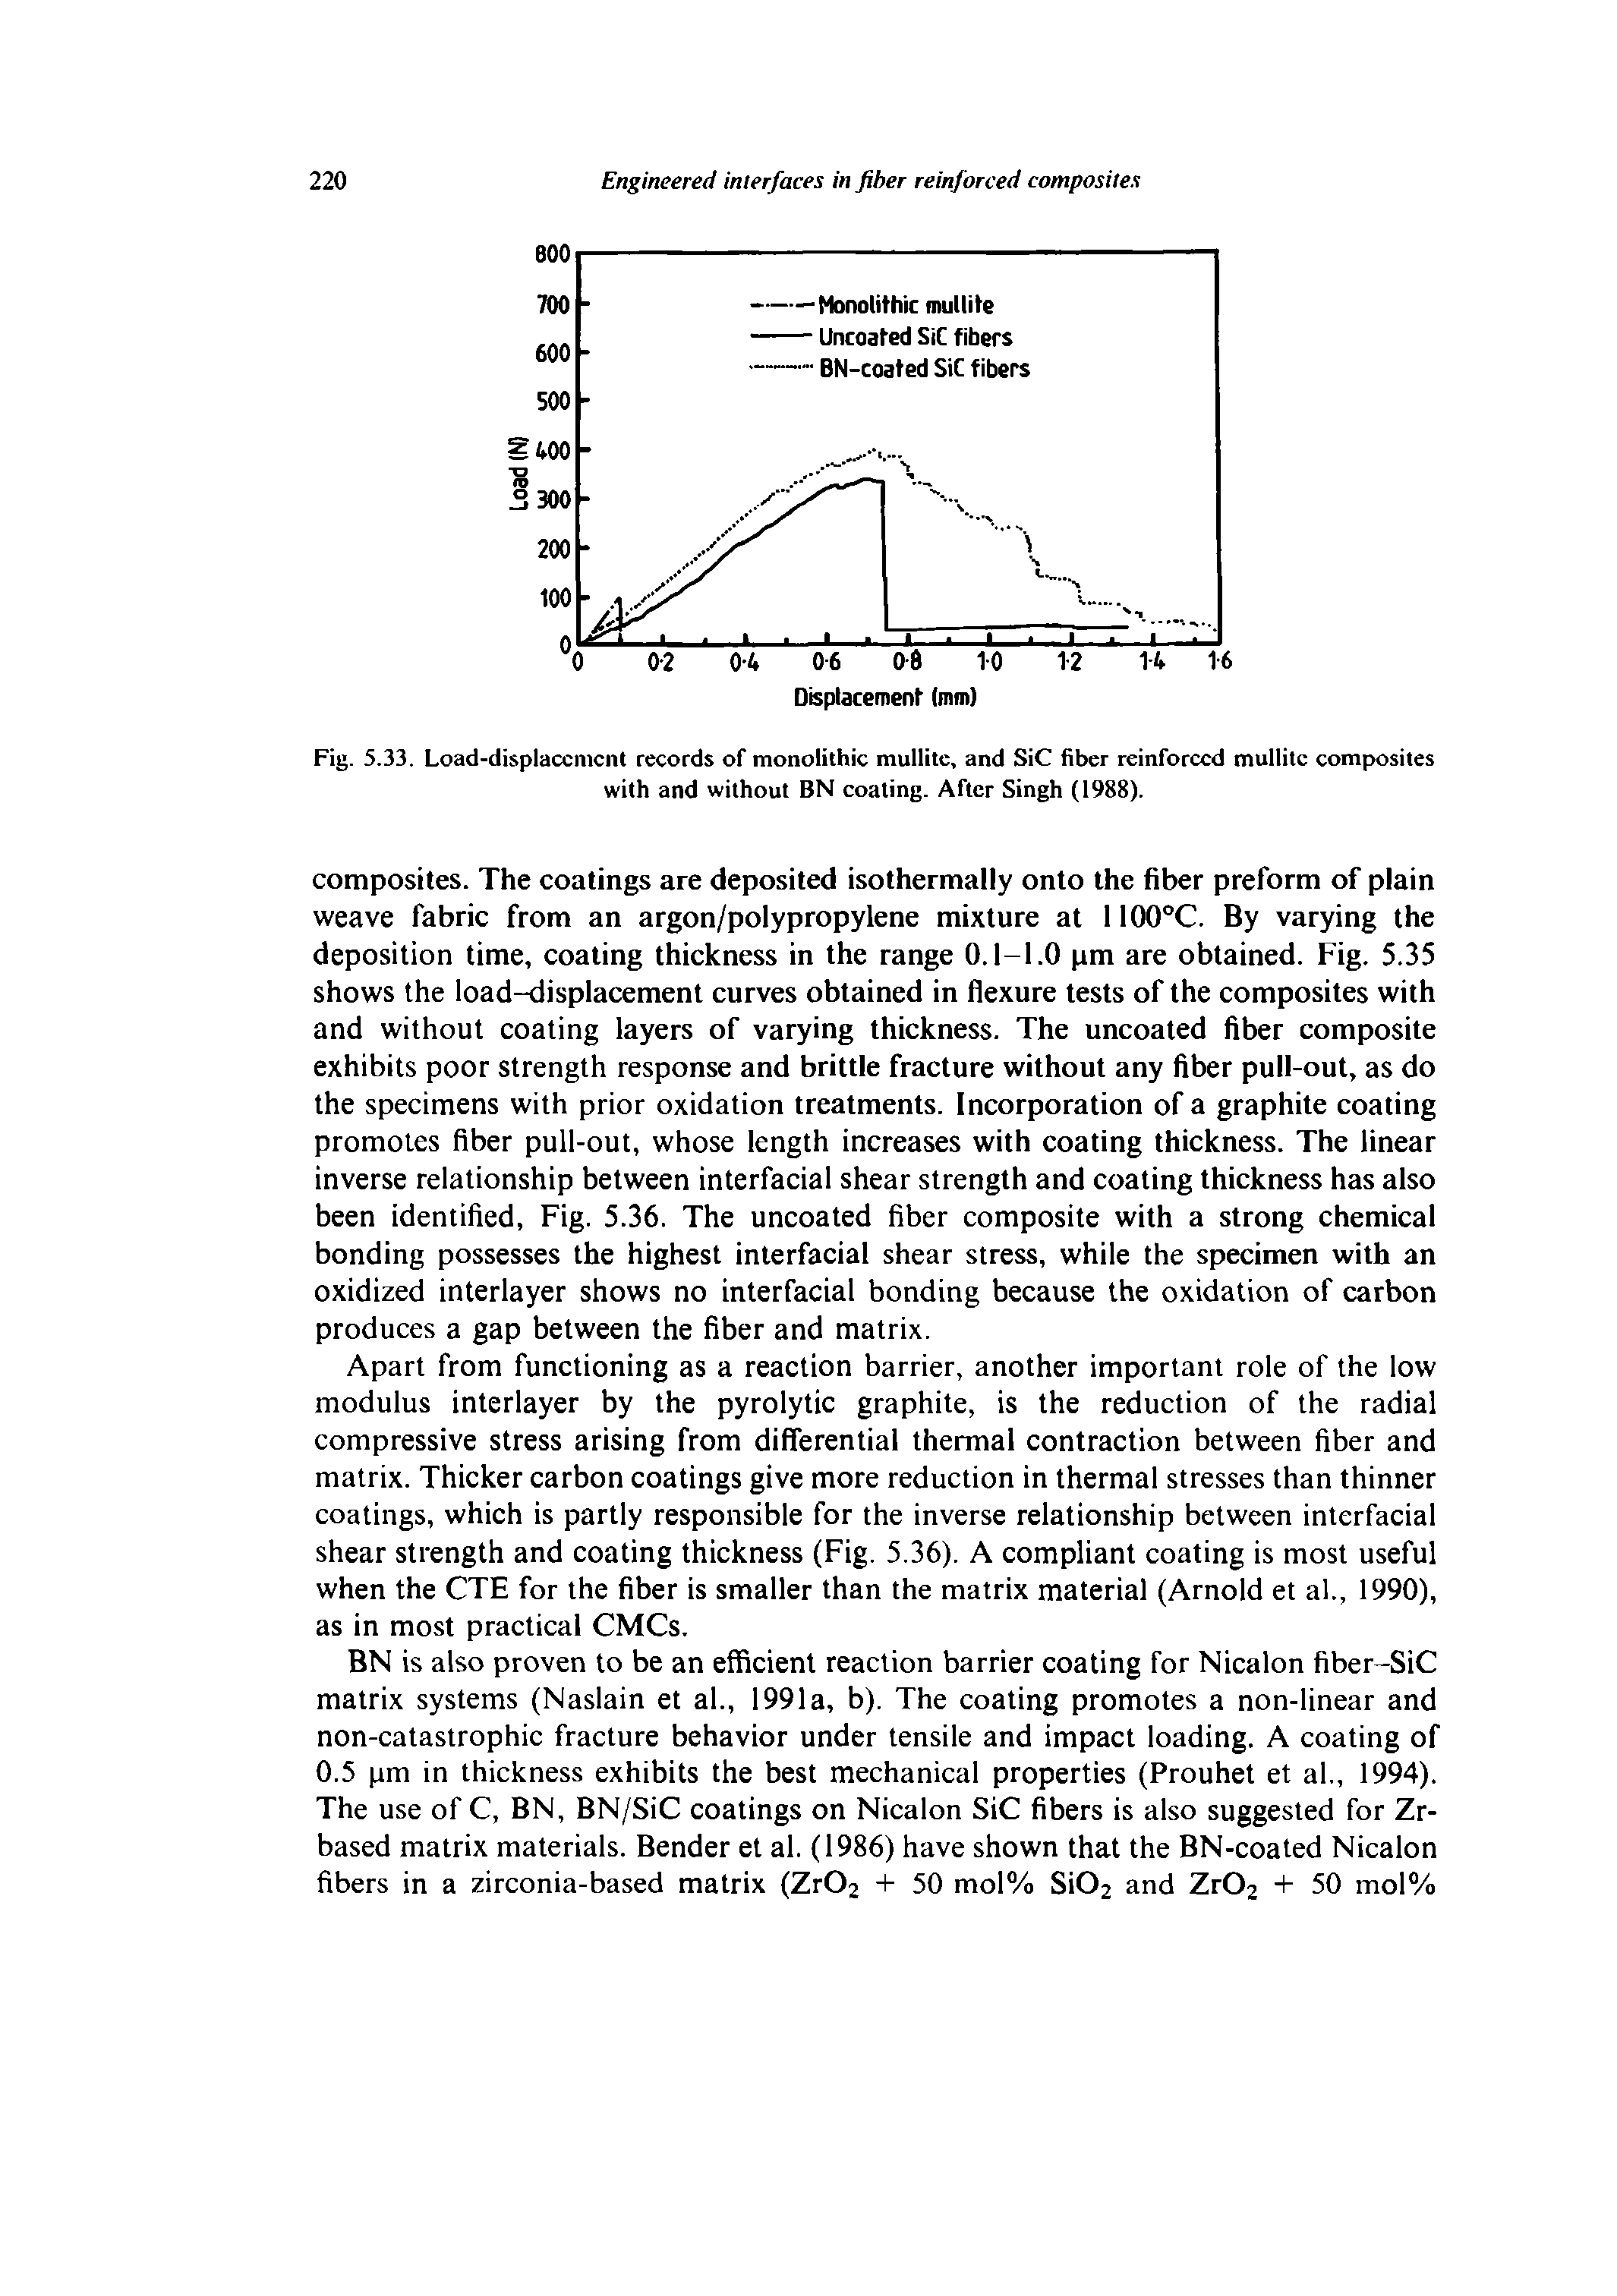 Fig. 5.33. Load-displaccmcnt records of monolithic mullitc, and SiC fiber reinforced mullitc composites with and without BN coating. After Singh (1988).